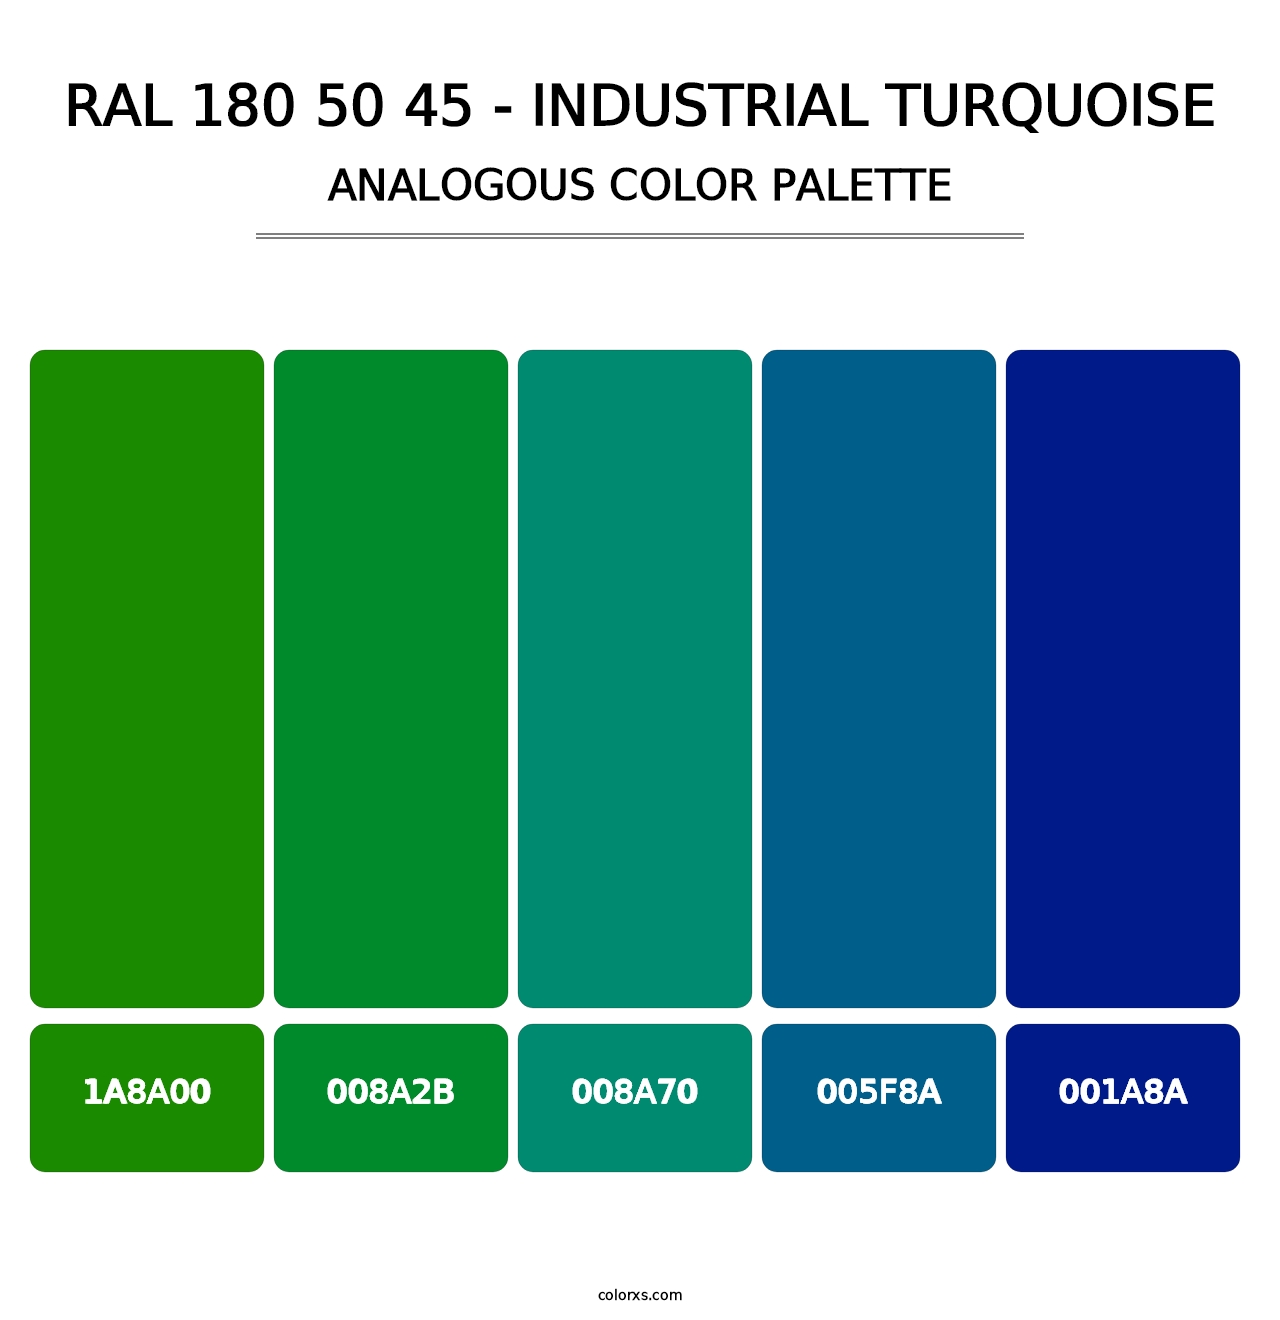 RAL 180 50 45 - Industrial Turquoise - Analogous Color Palette